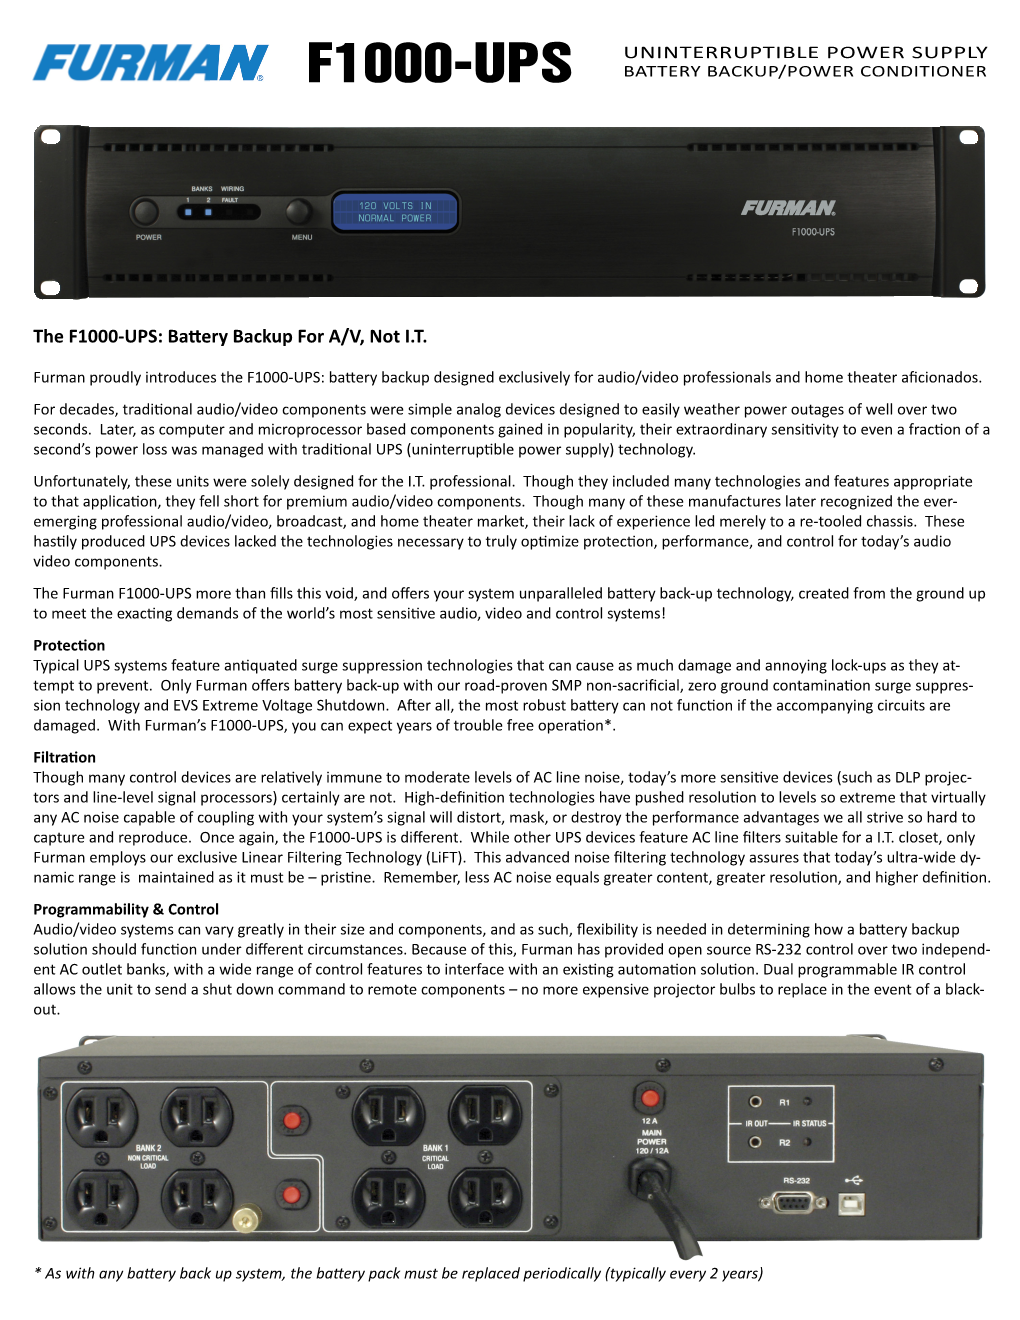 F1000-Ups Battery Backup/Power Conditioner